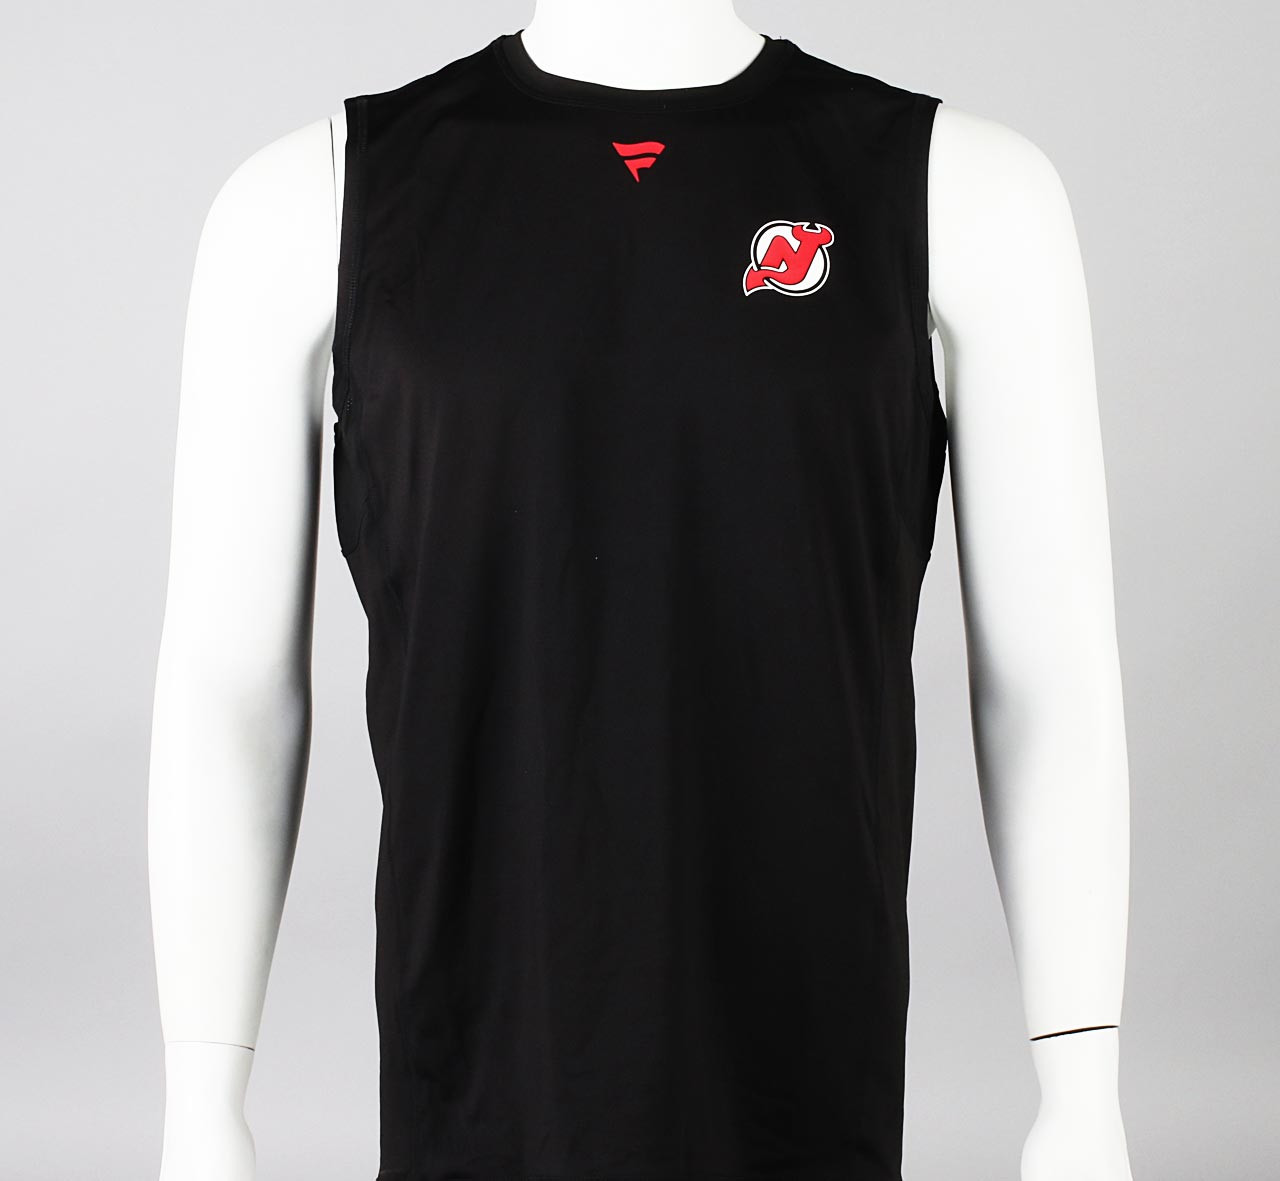 New Jersey Devils Large Authentic Pro Sleeveless Compression Shirt